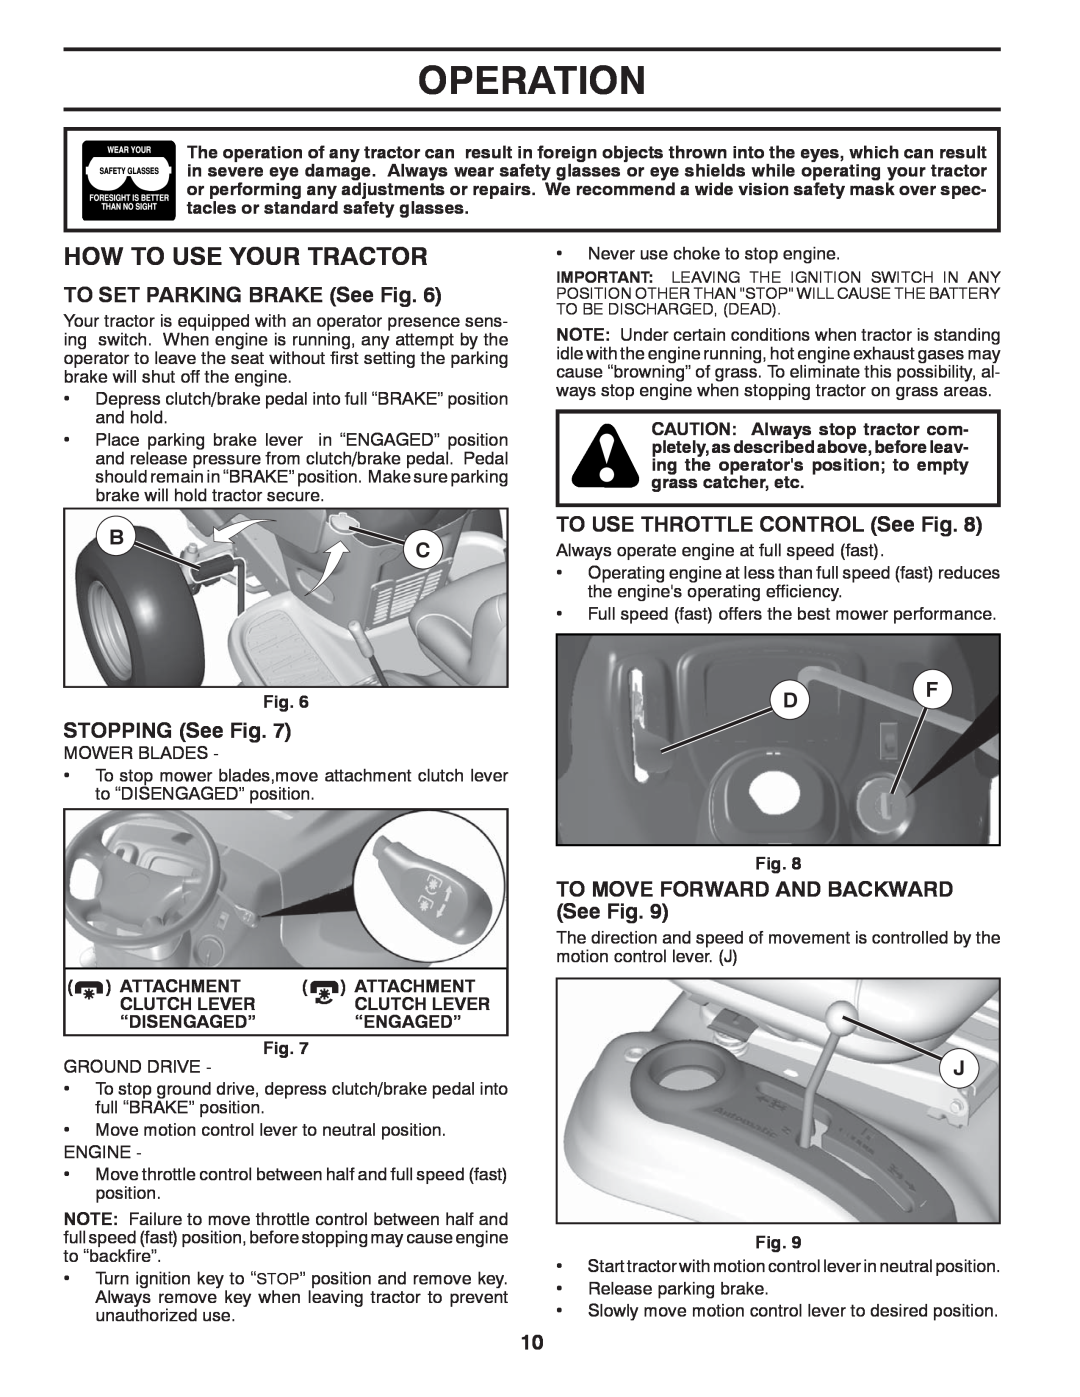 Poulan 96042007201, 427159 manual How To Use Your Tractor, Operation, TO SET PARKING BRAKE See Fig, STOPPING See Fig 